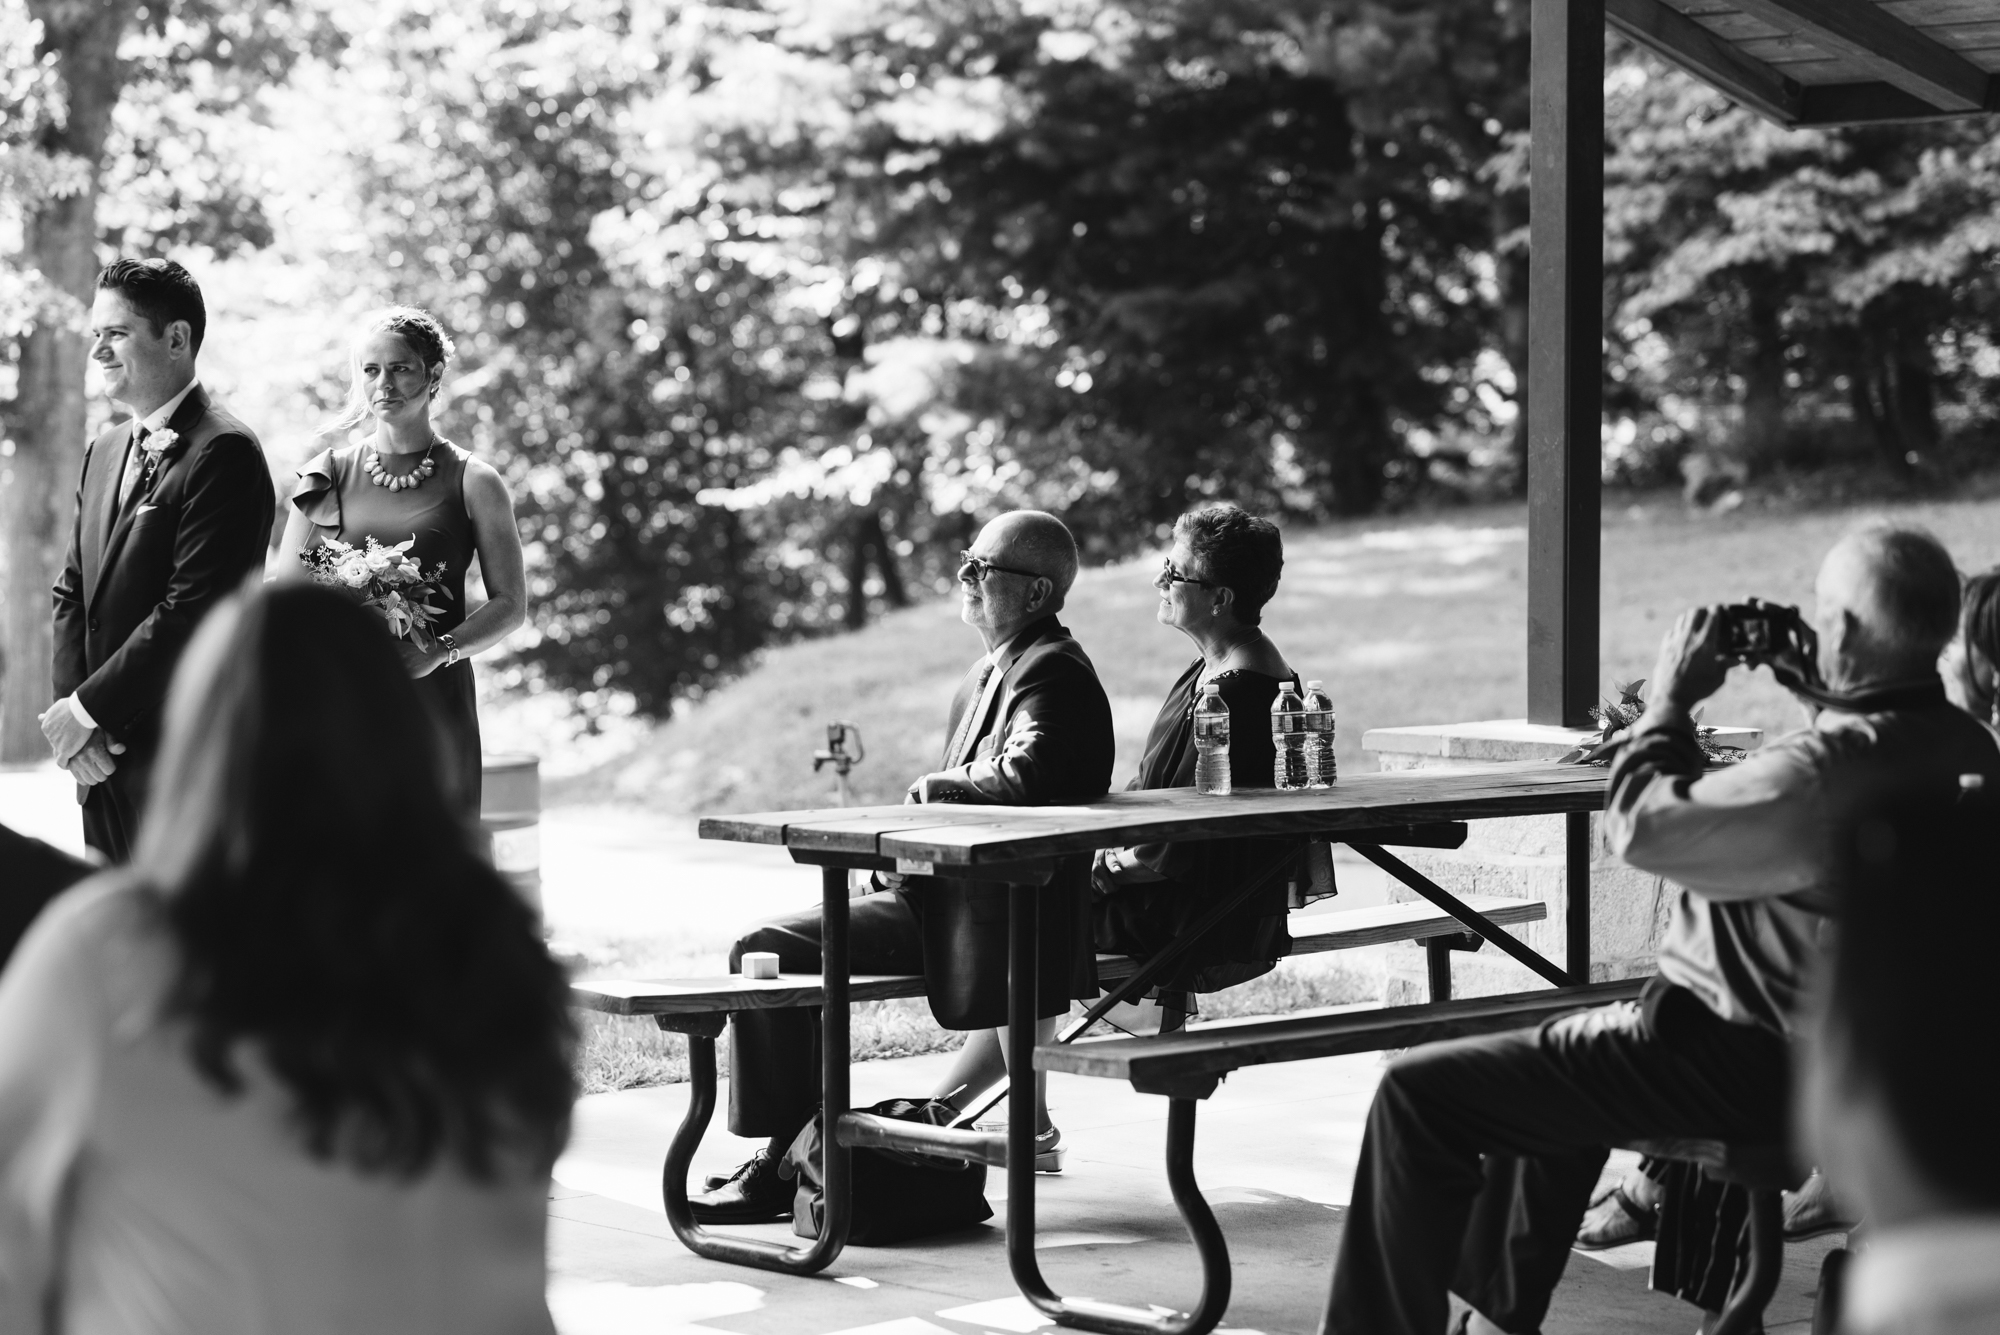 Pop-up Ceremony, Outdoor Wedding, Casual, Simple, Lake Roland, Baltimore, Maryland Wedding Photographer, Laid Back, DIY, Park, Parent's Reactions During Ceremony, Black and White Photo, Park Pavilion